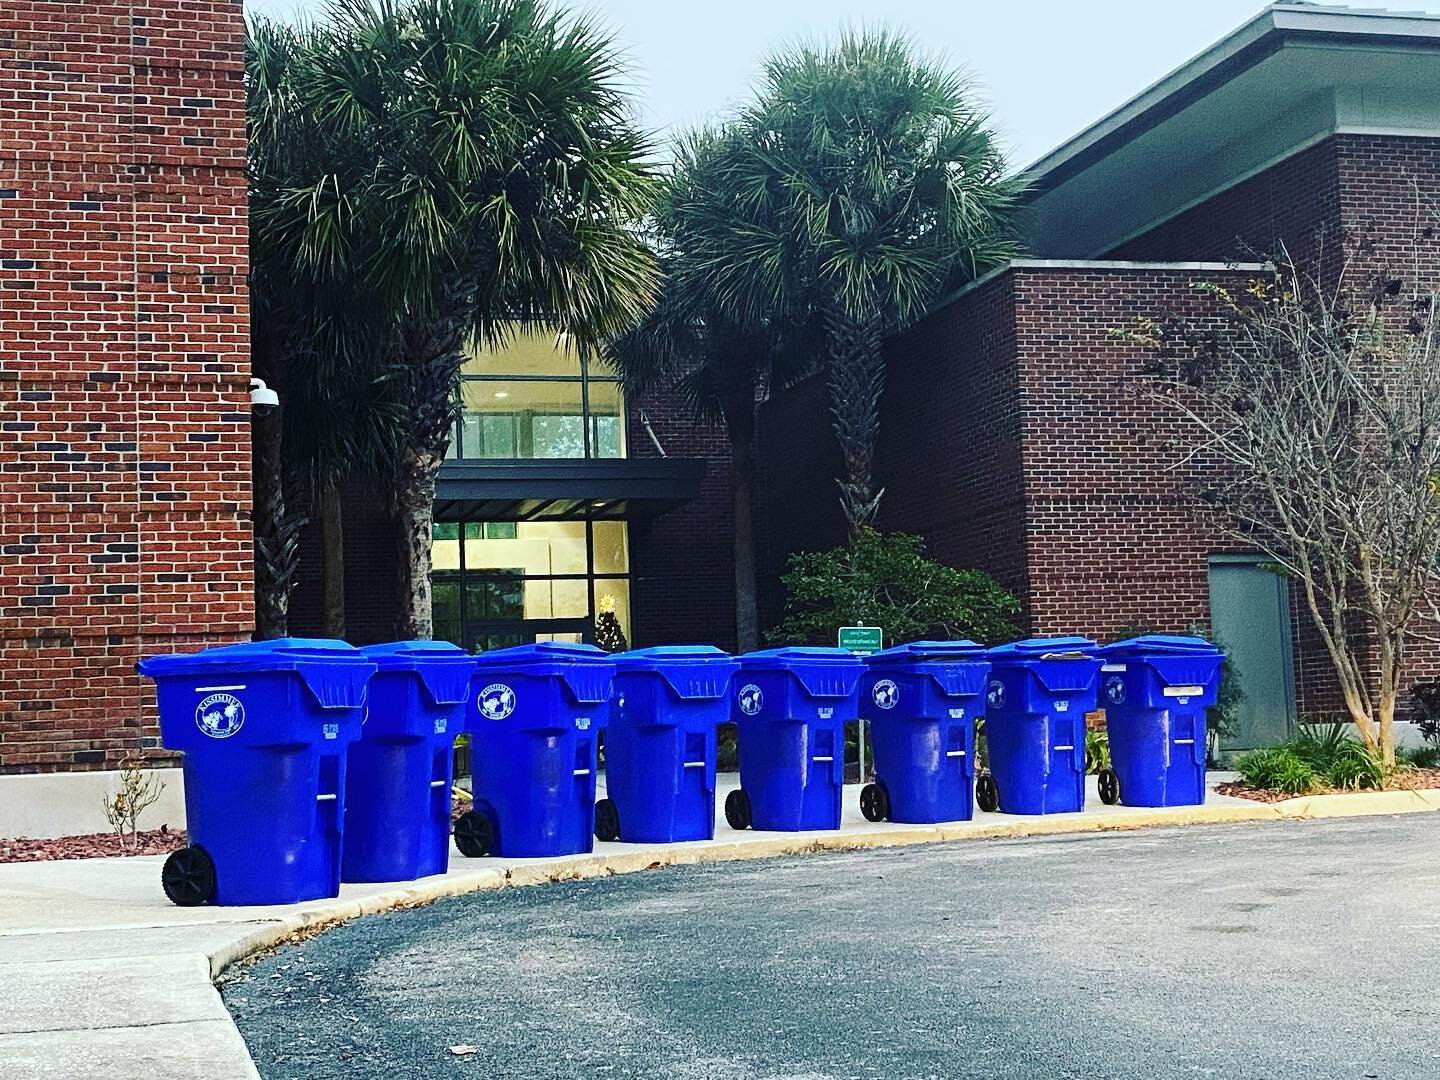 Recycling Done Right!
-a holiday reminder of how to recycle correctly in the City of Kissimmee 

All recyclable items must be rinsed; caps must be removed; and cardboard boxes must be flattened. 
The BLUE recycling carts will not be collected if they